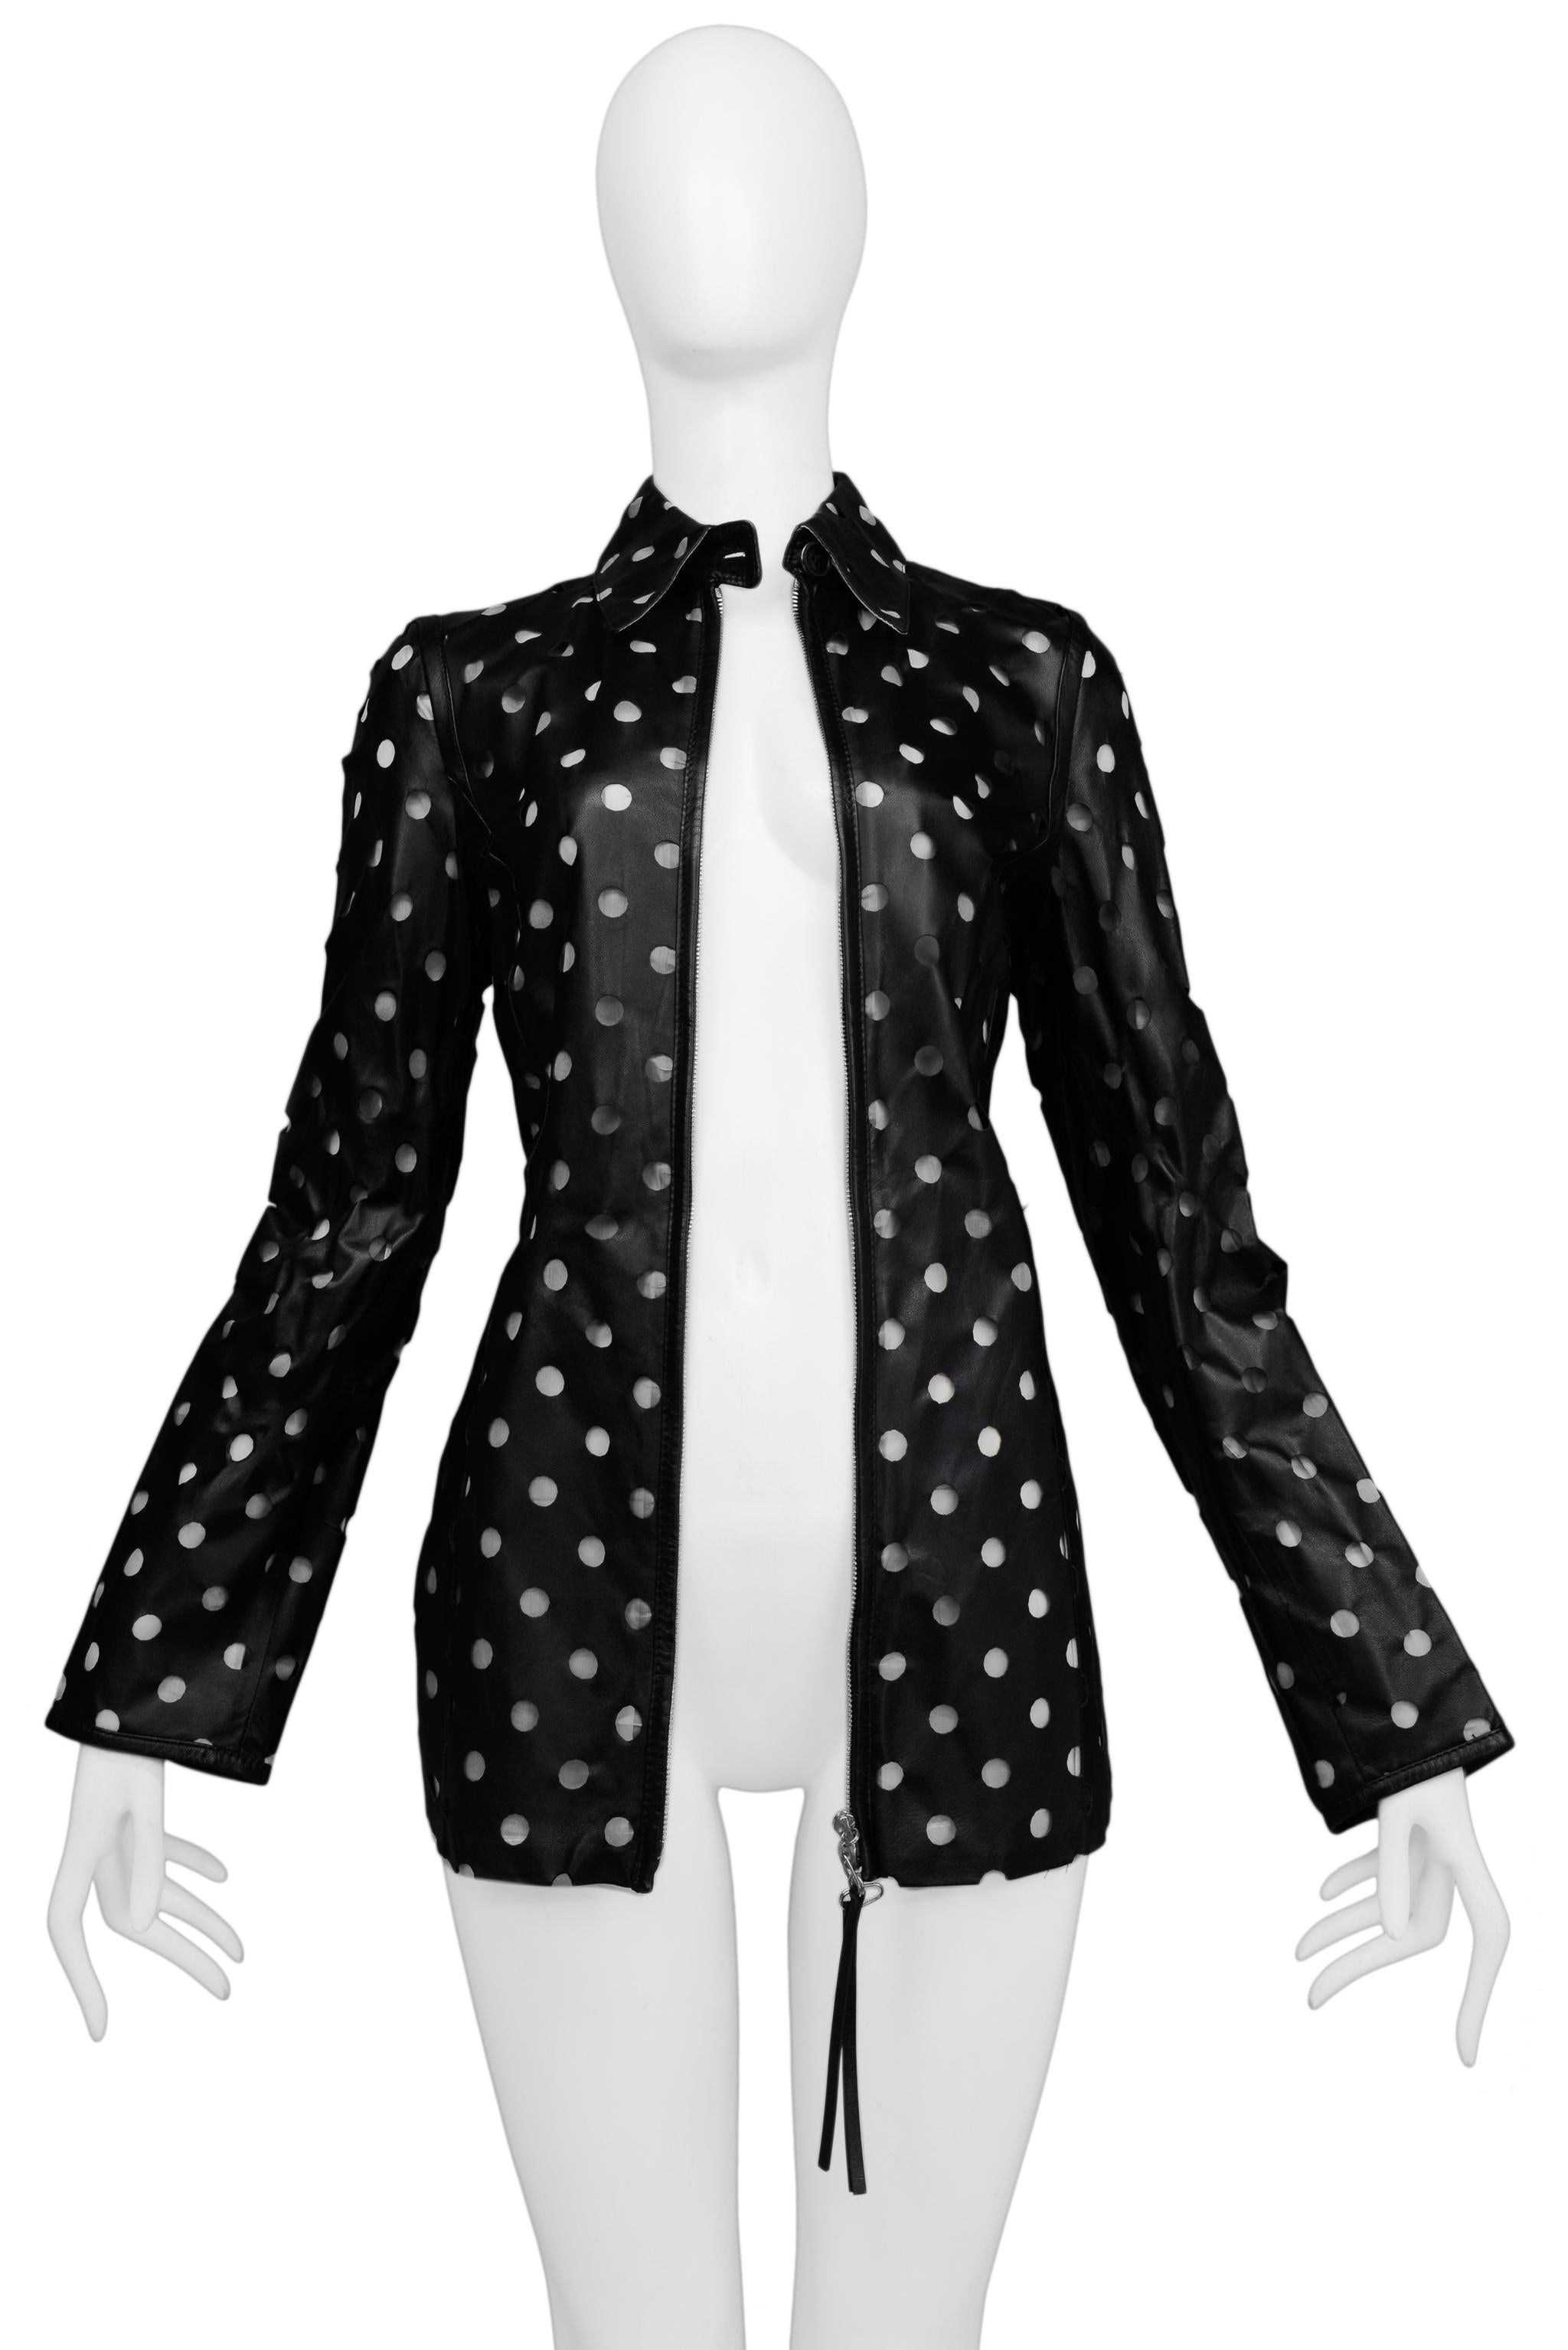 Gianfranco Ferre Black Leather Cut-Out Dot Jacket For Sale 1